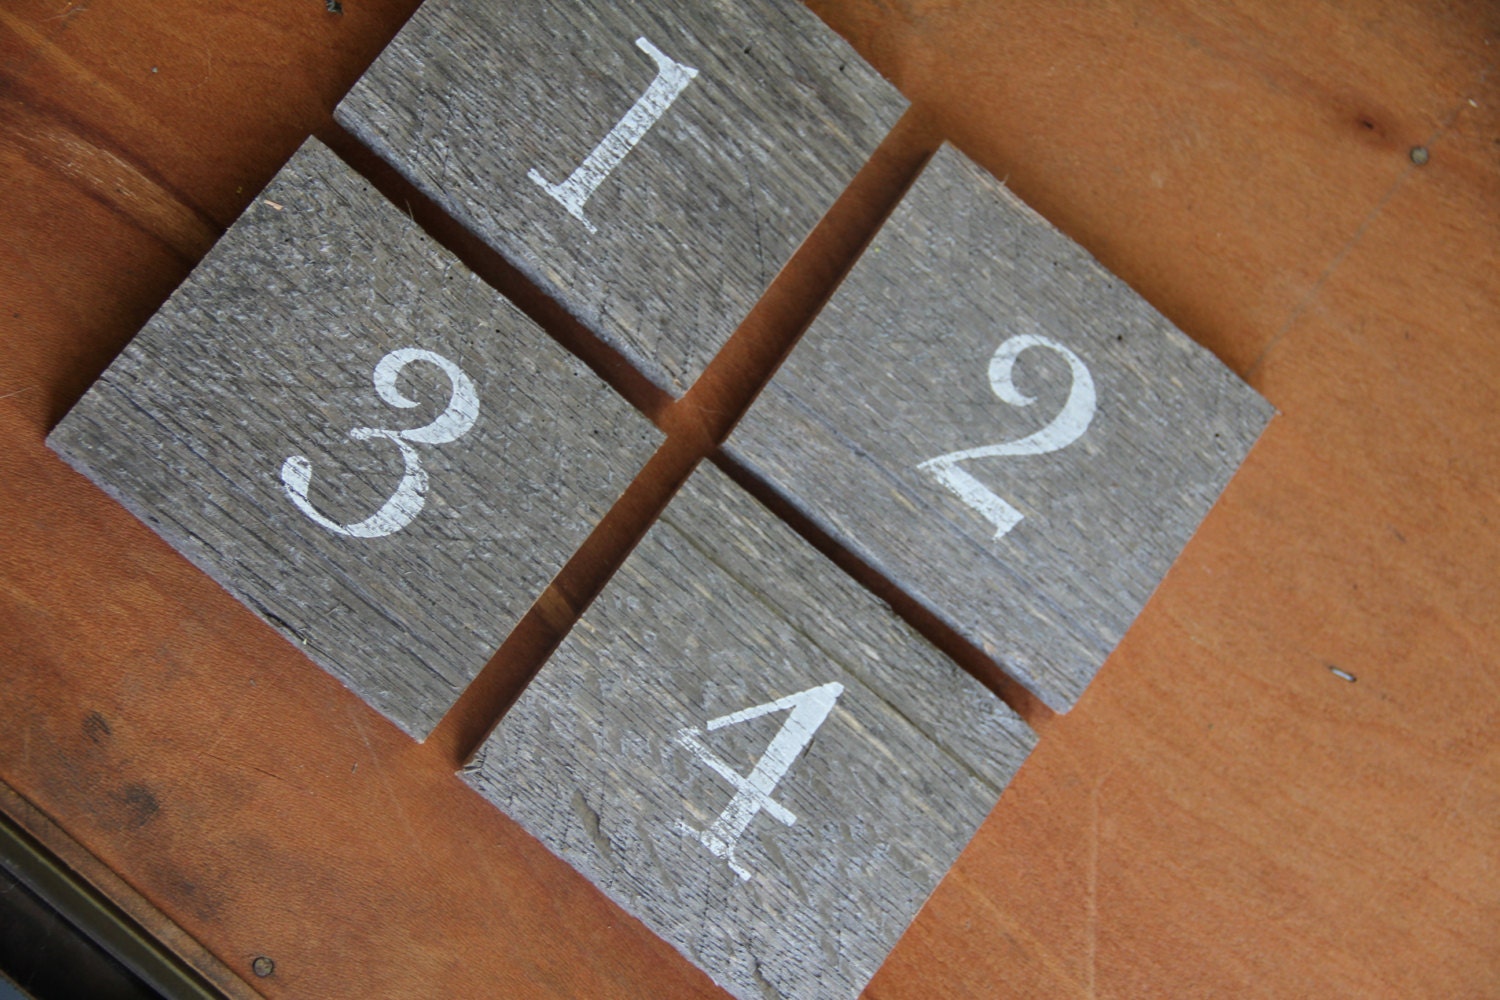 Rustic Table Numbers set of 10, Rustic Wedding, Rustic Decorations